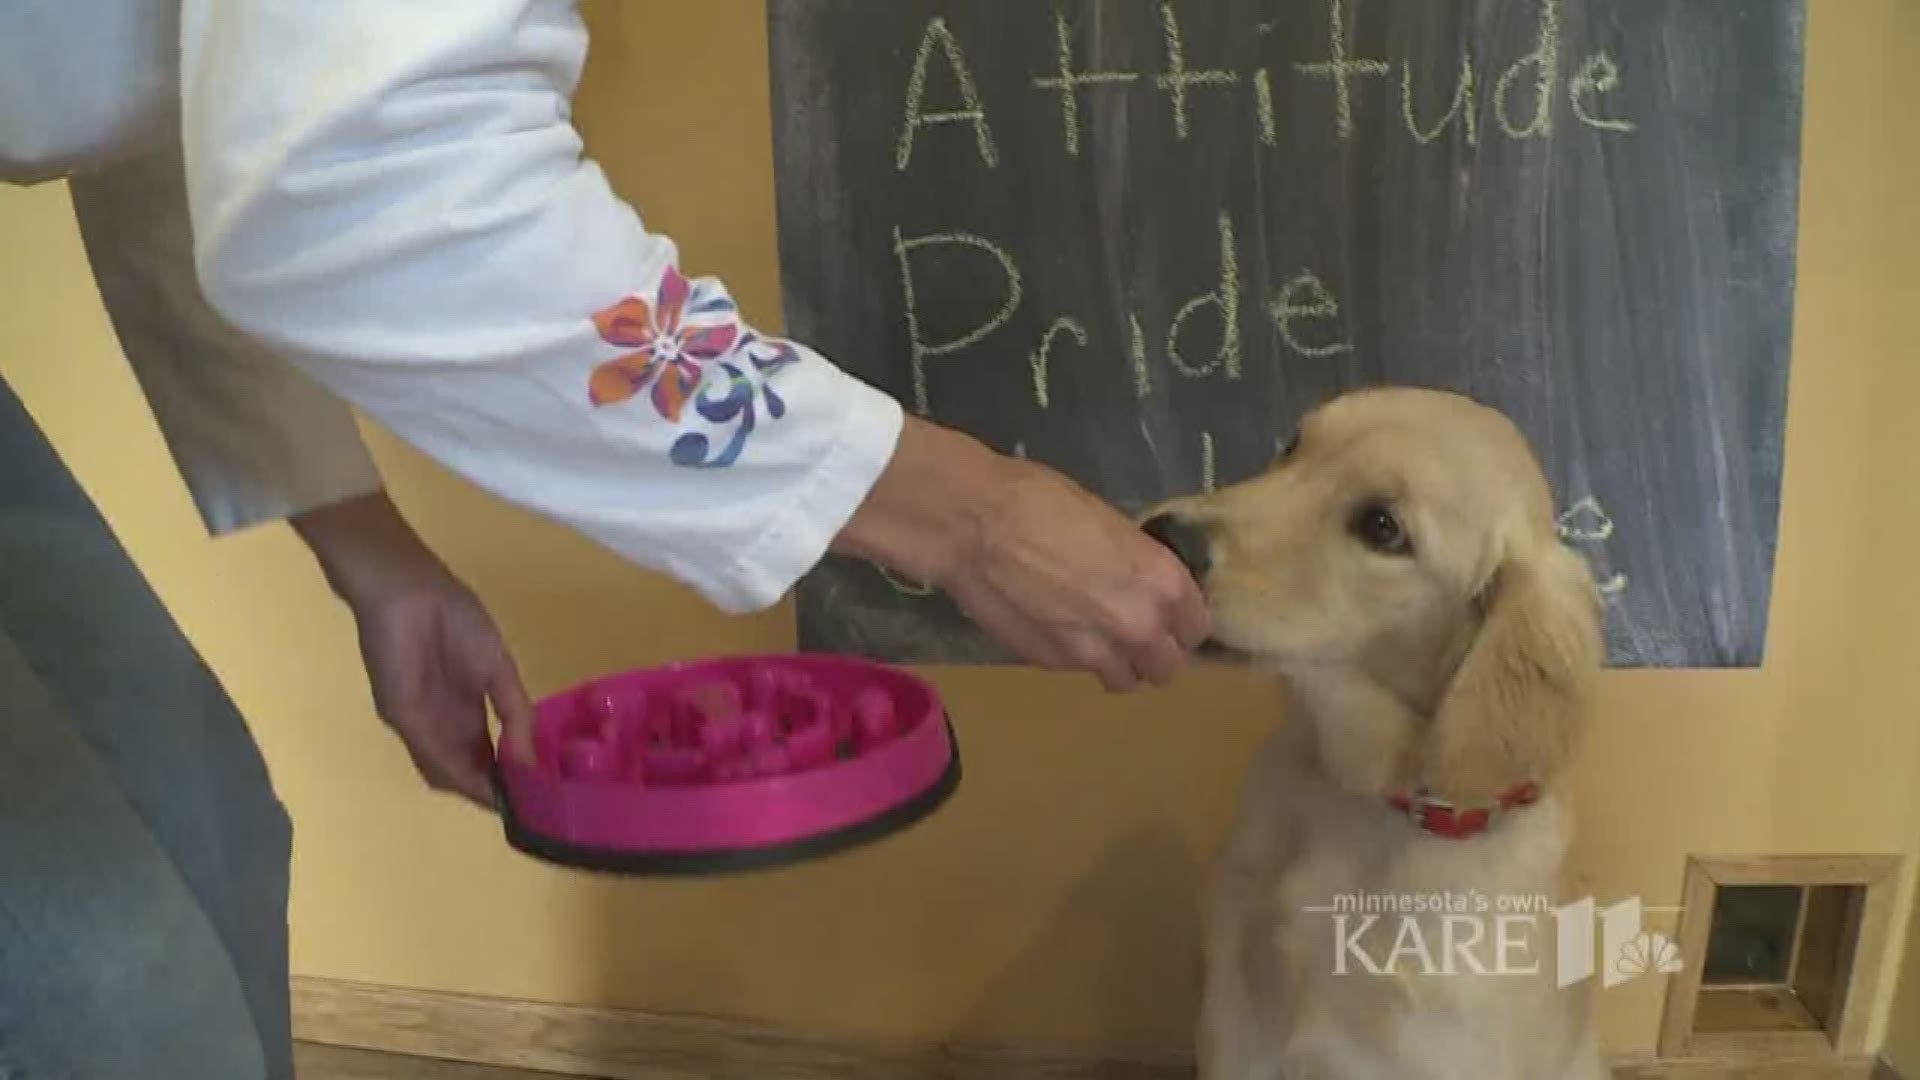 Dog Trainer Kathryn Newman explains food training tips with Poppy the Puppy.